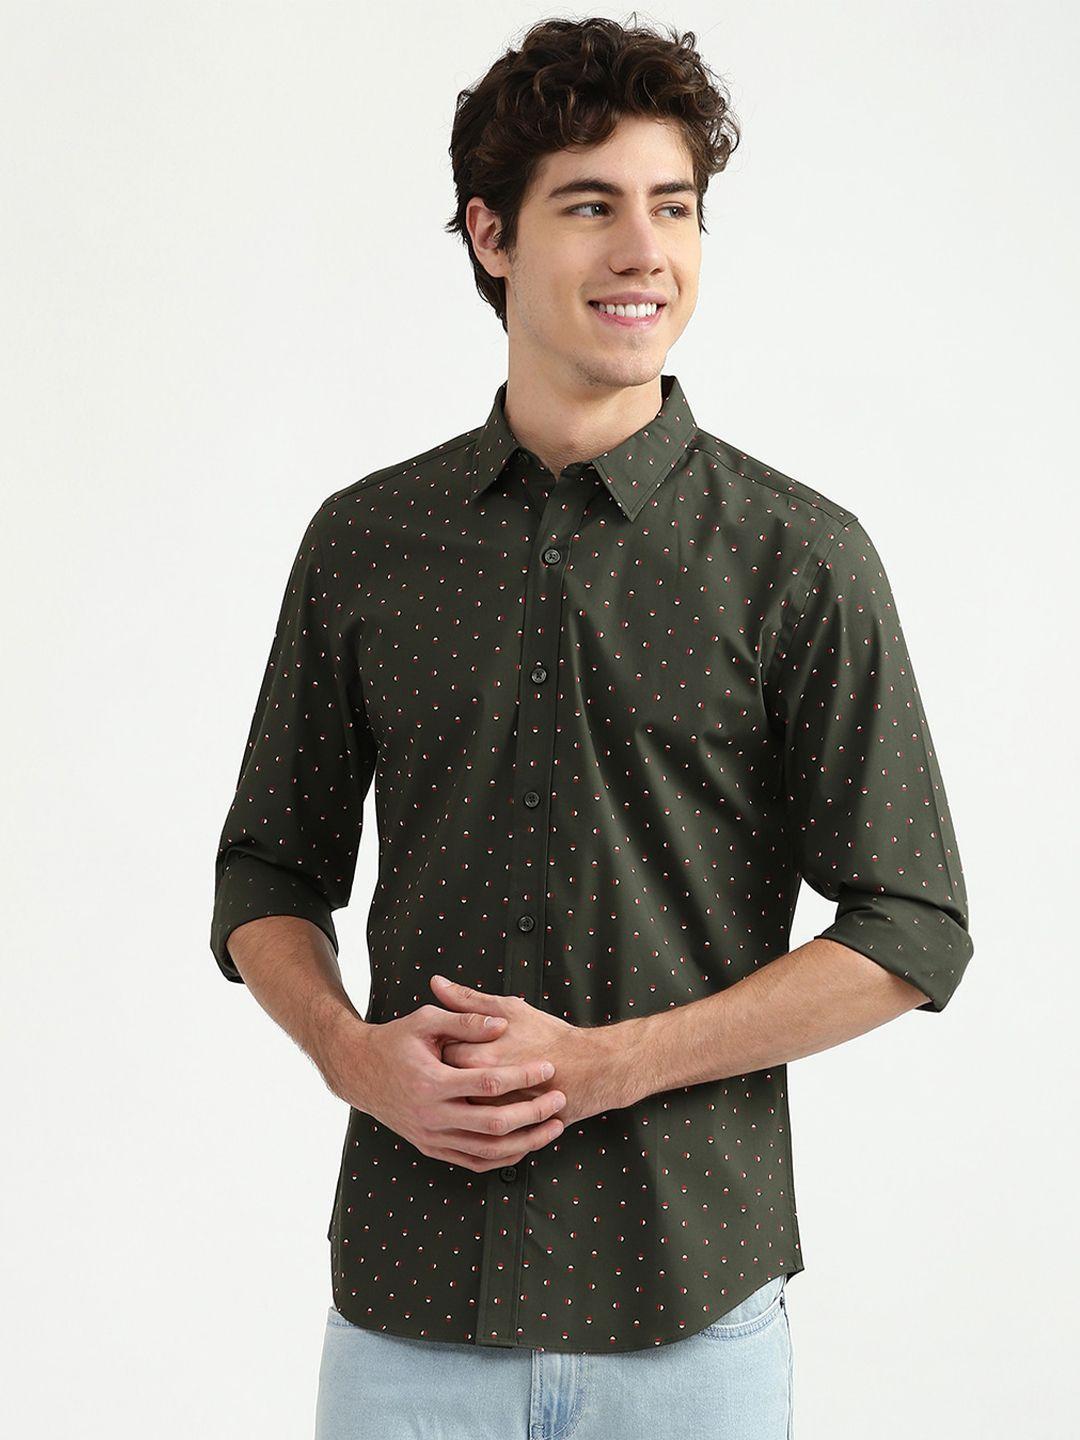 united-colors-of-benetton-men-olive-green-printed-cotton-casual-shirt